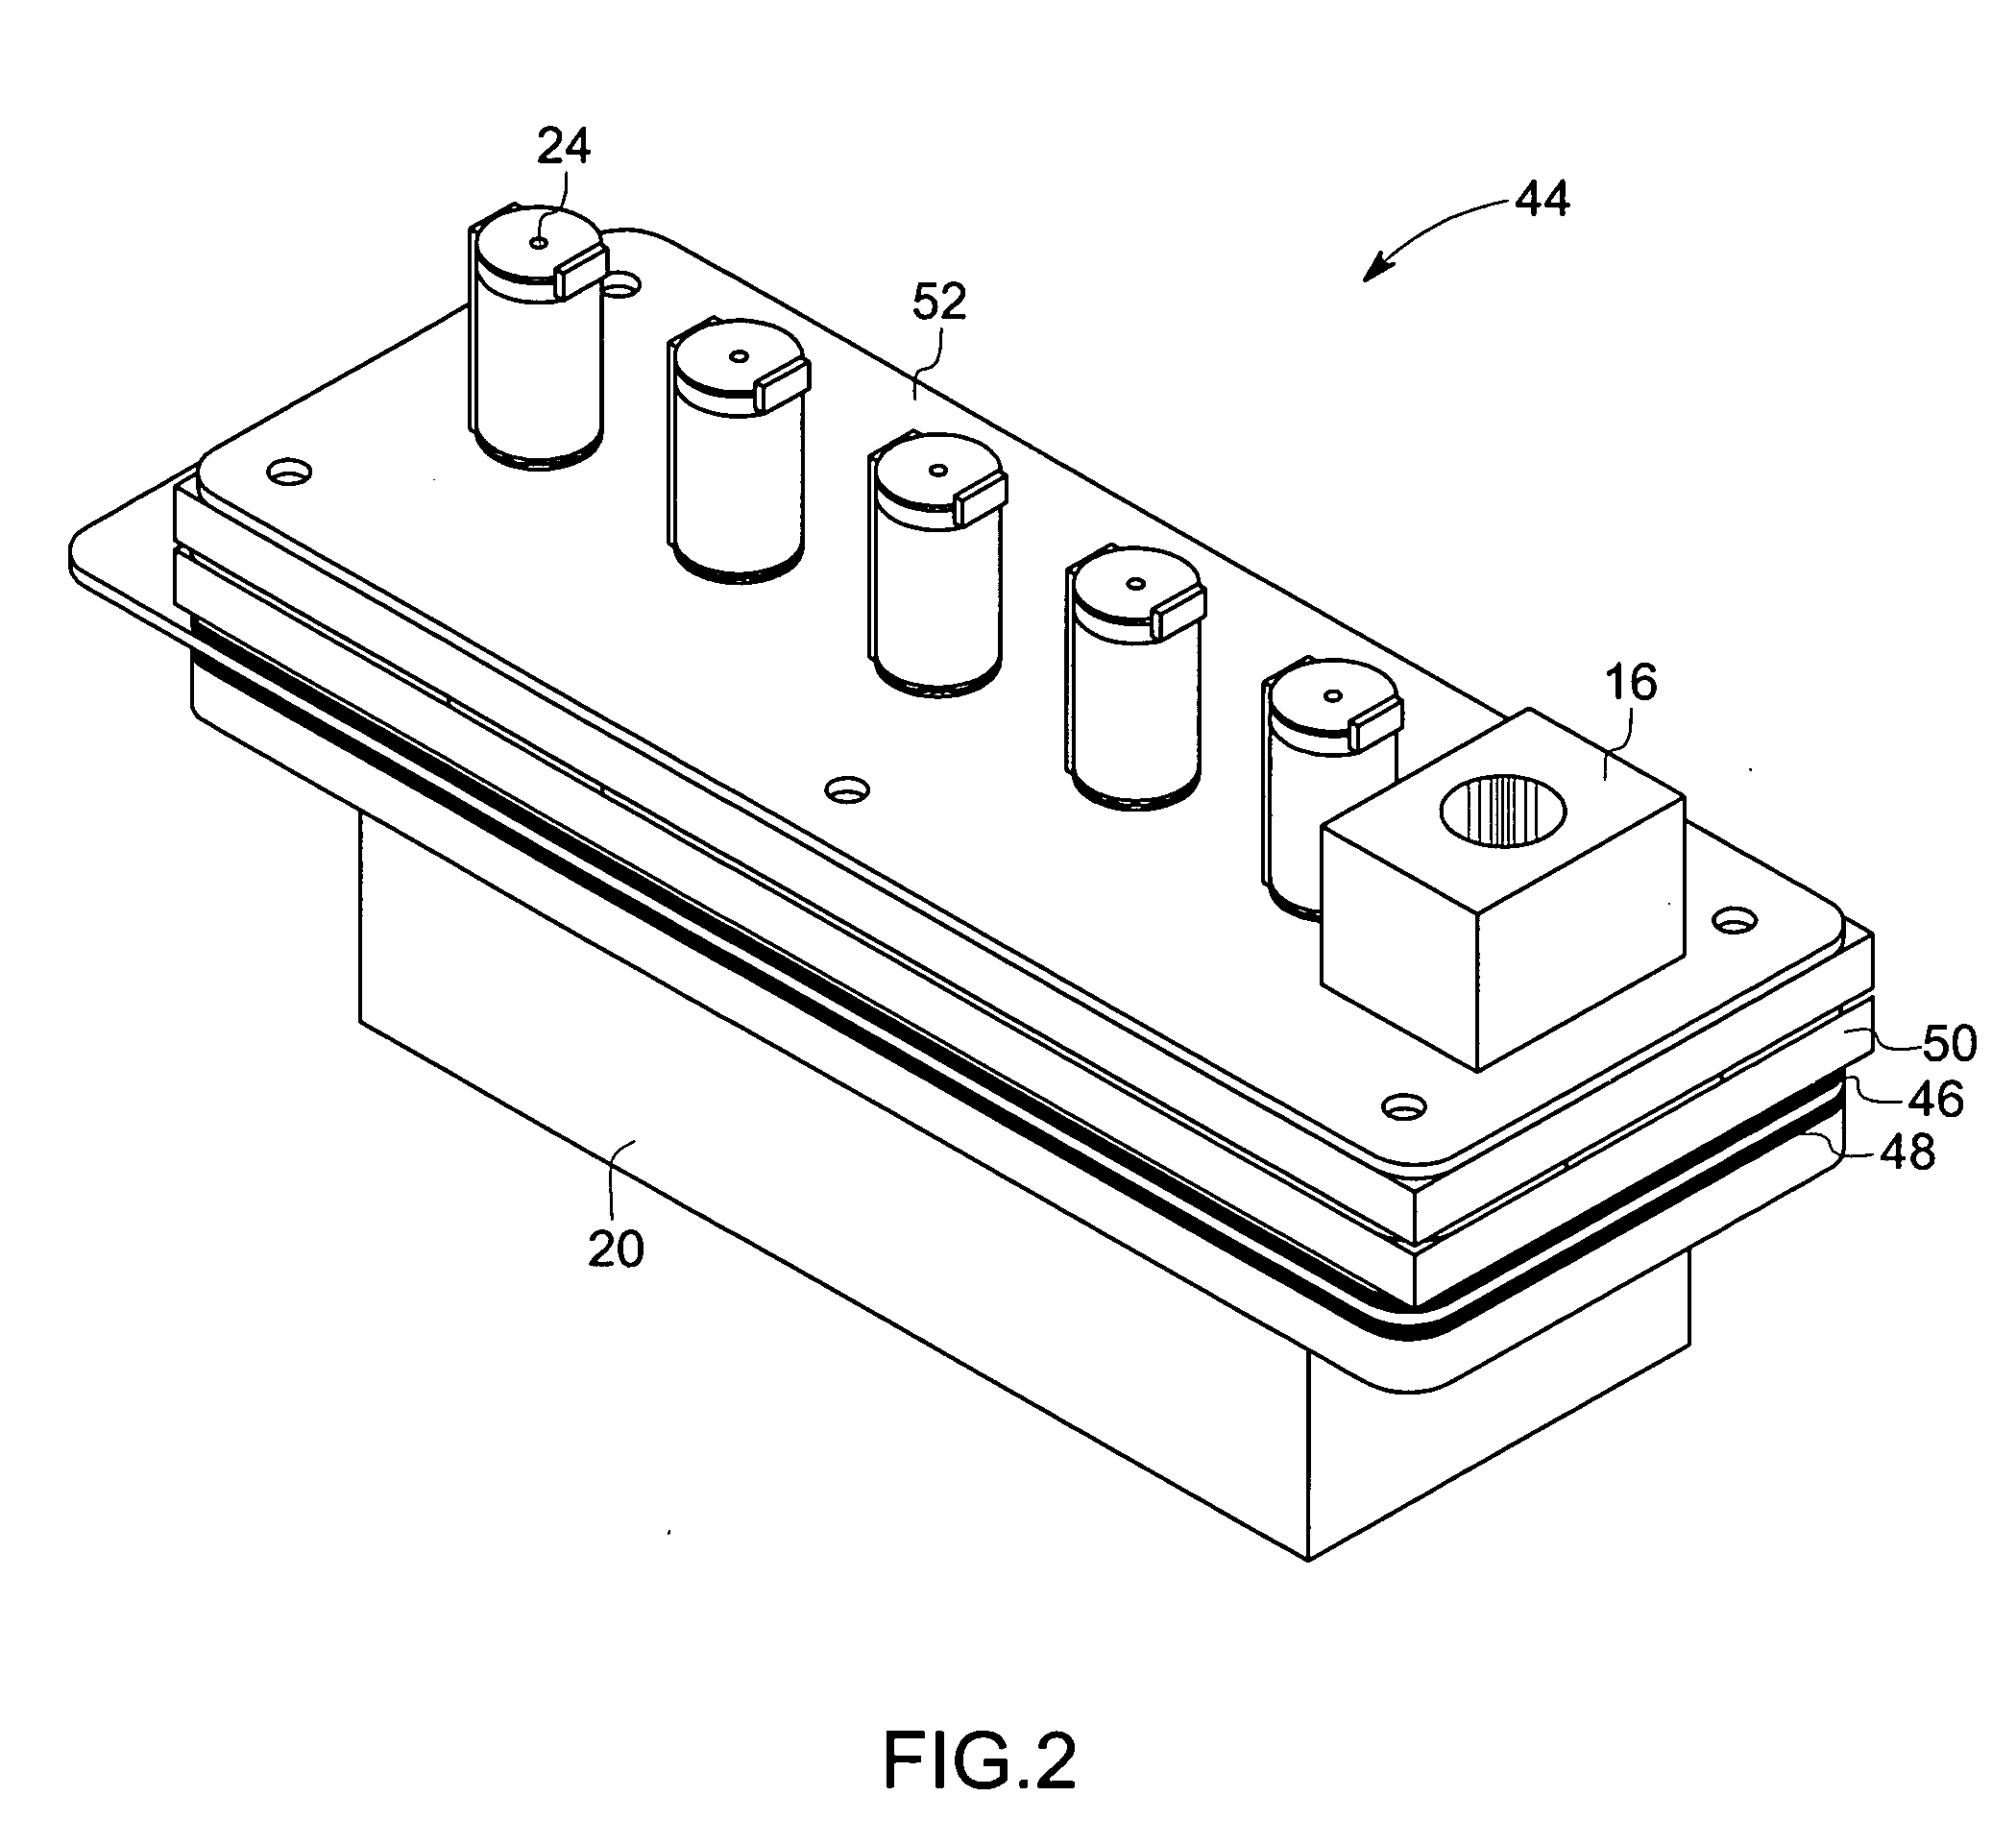 Control valve assembly for controlling gas flow in gas combustion systems